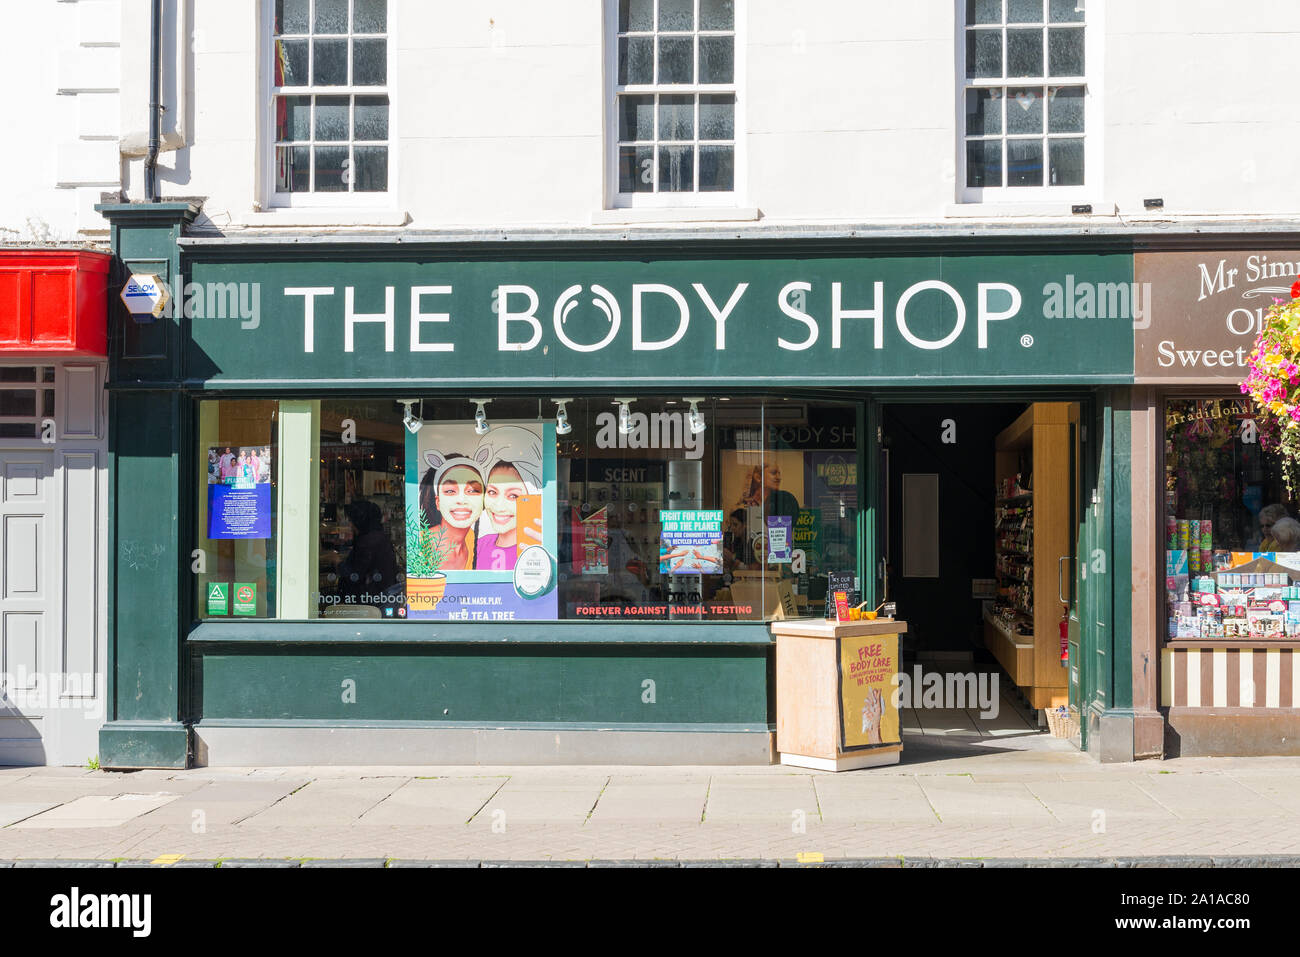 Branch of The Body Shop which sells ethical and natural personal care products and cosmetics in Stratford-upon-Avon Stock Photo